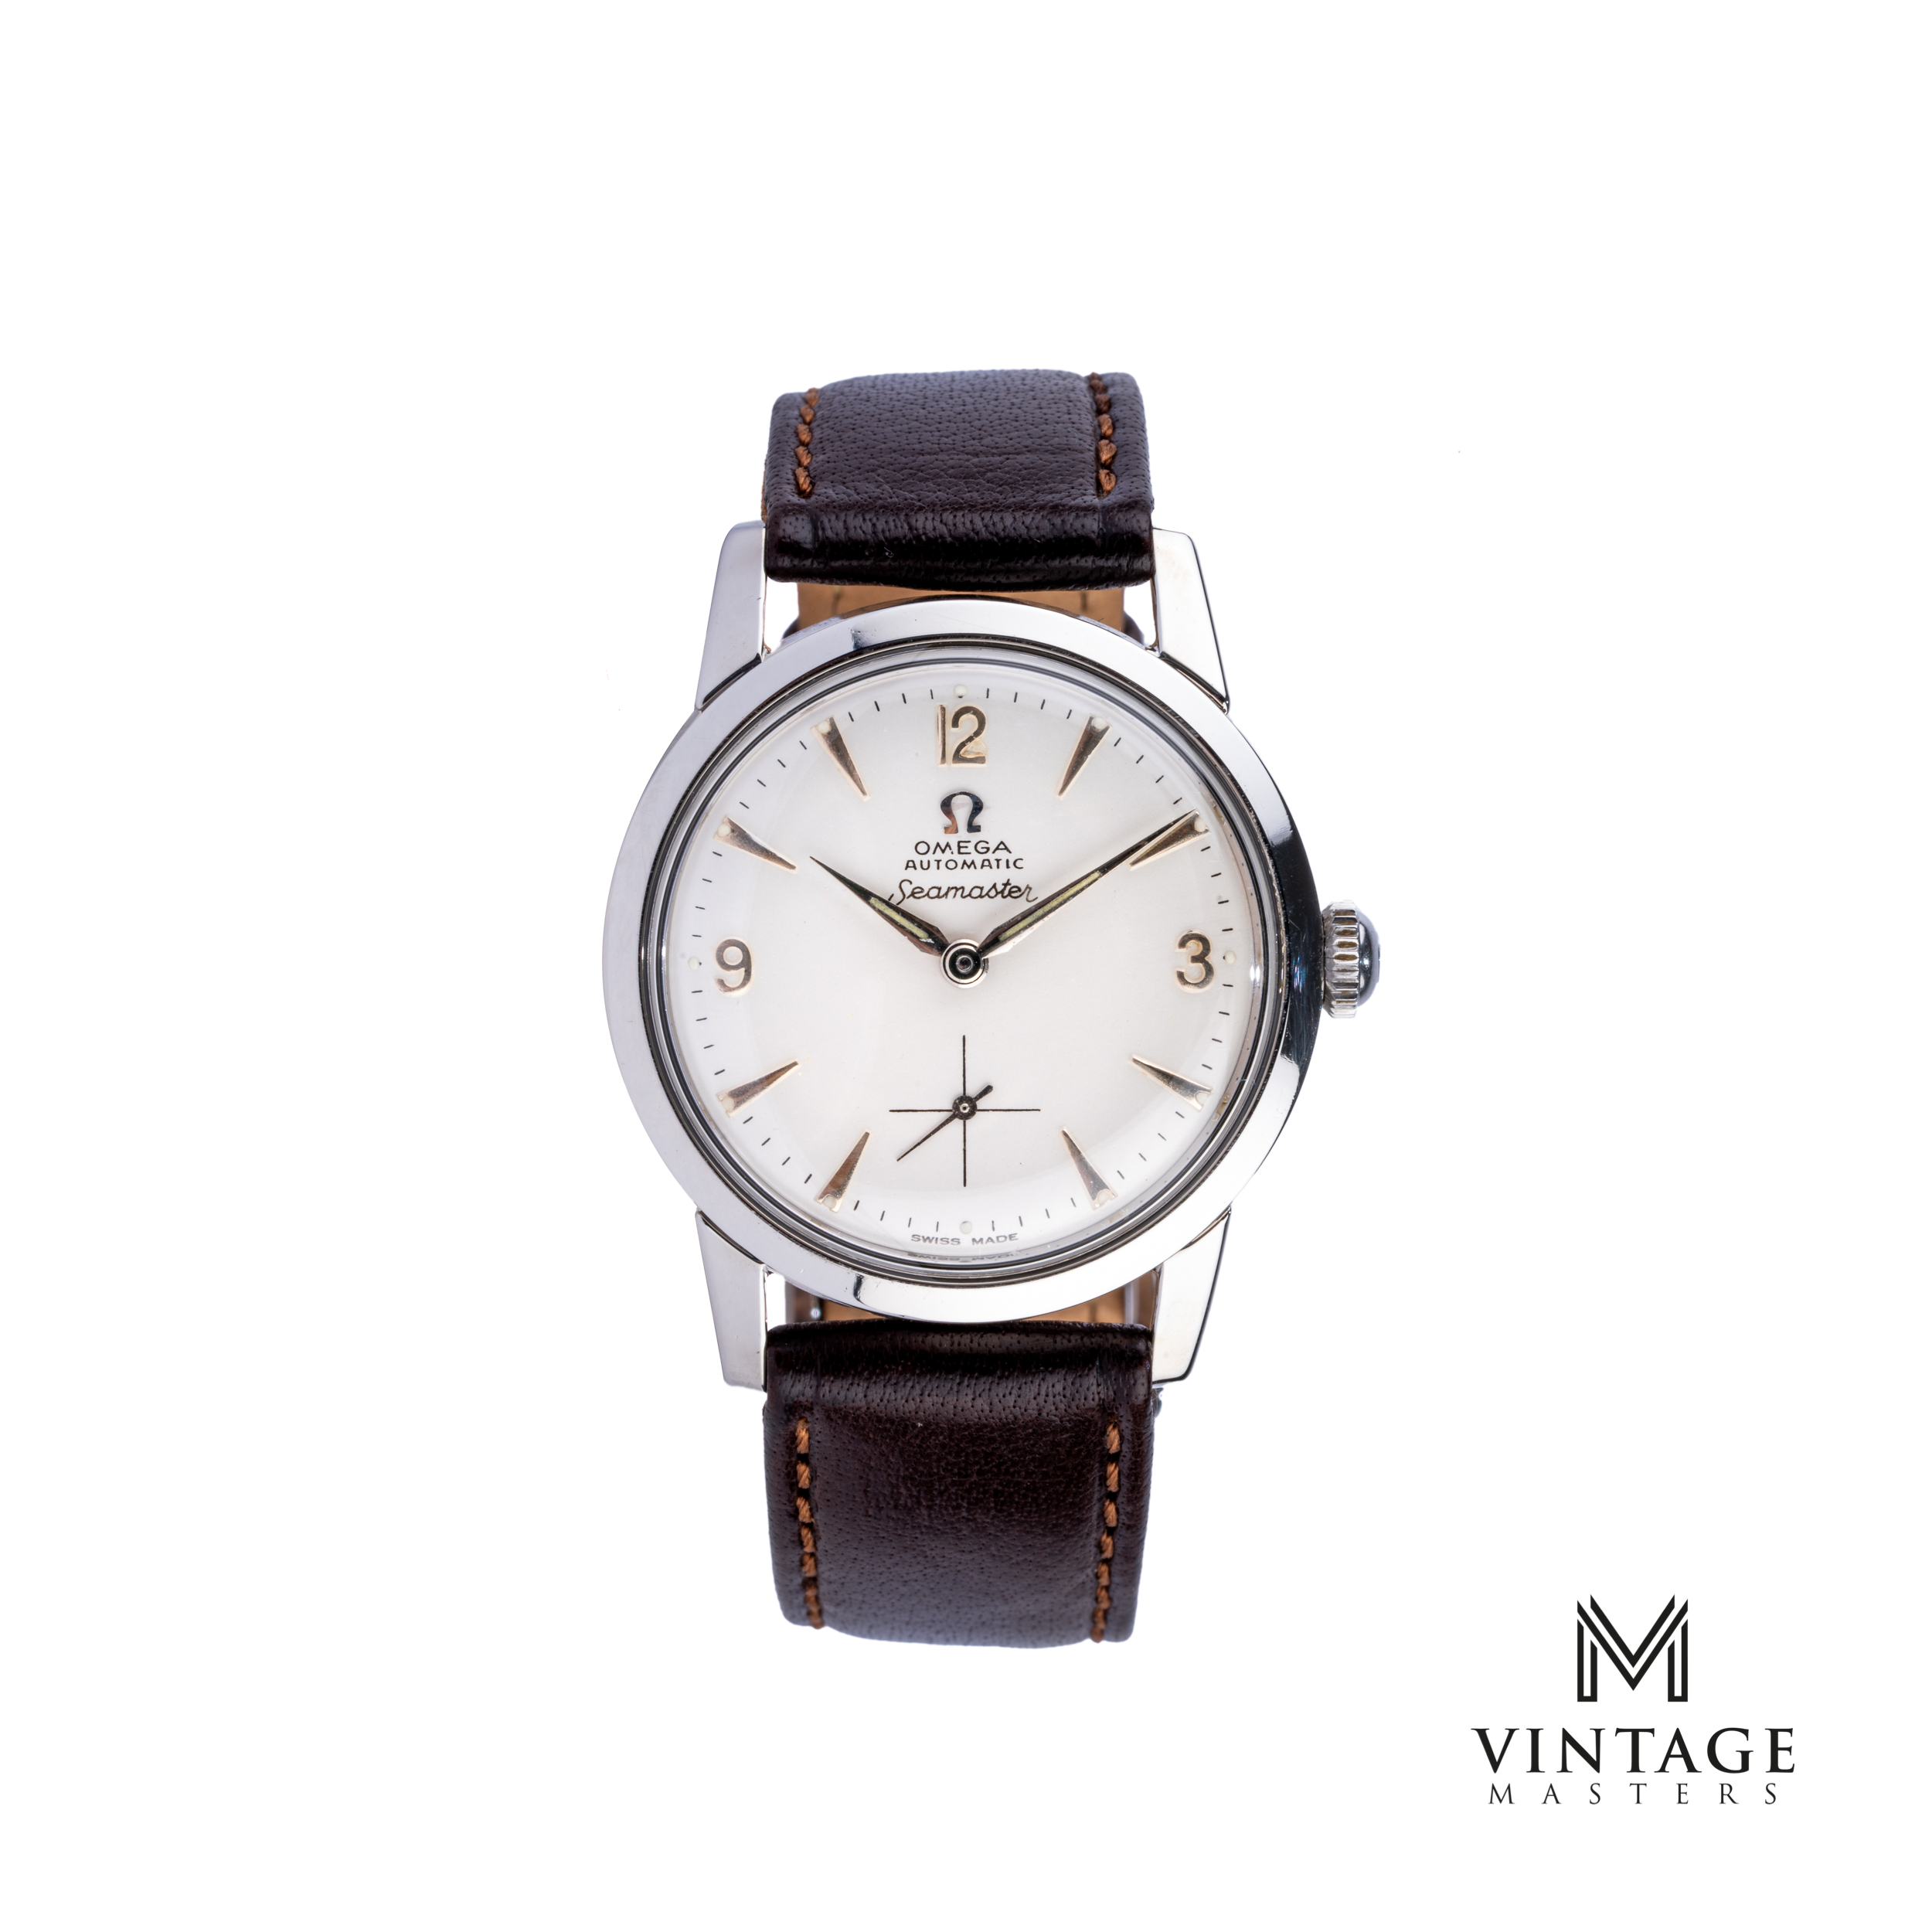 vintage omega automatic watches